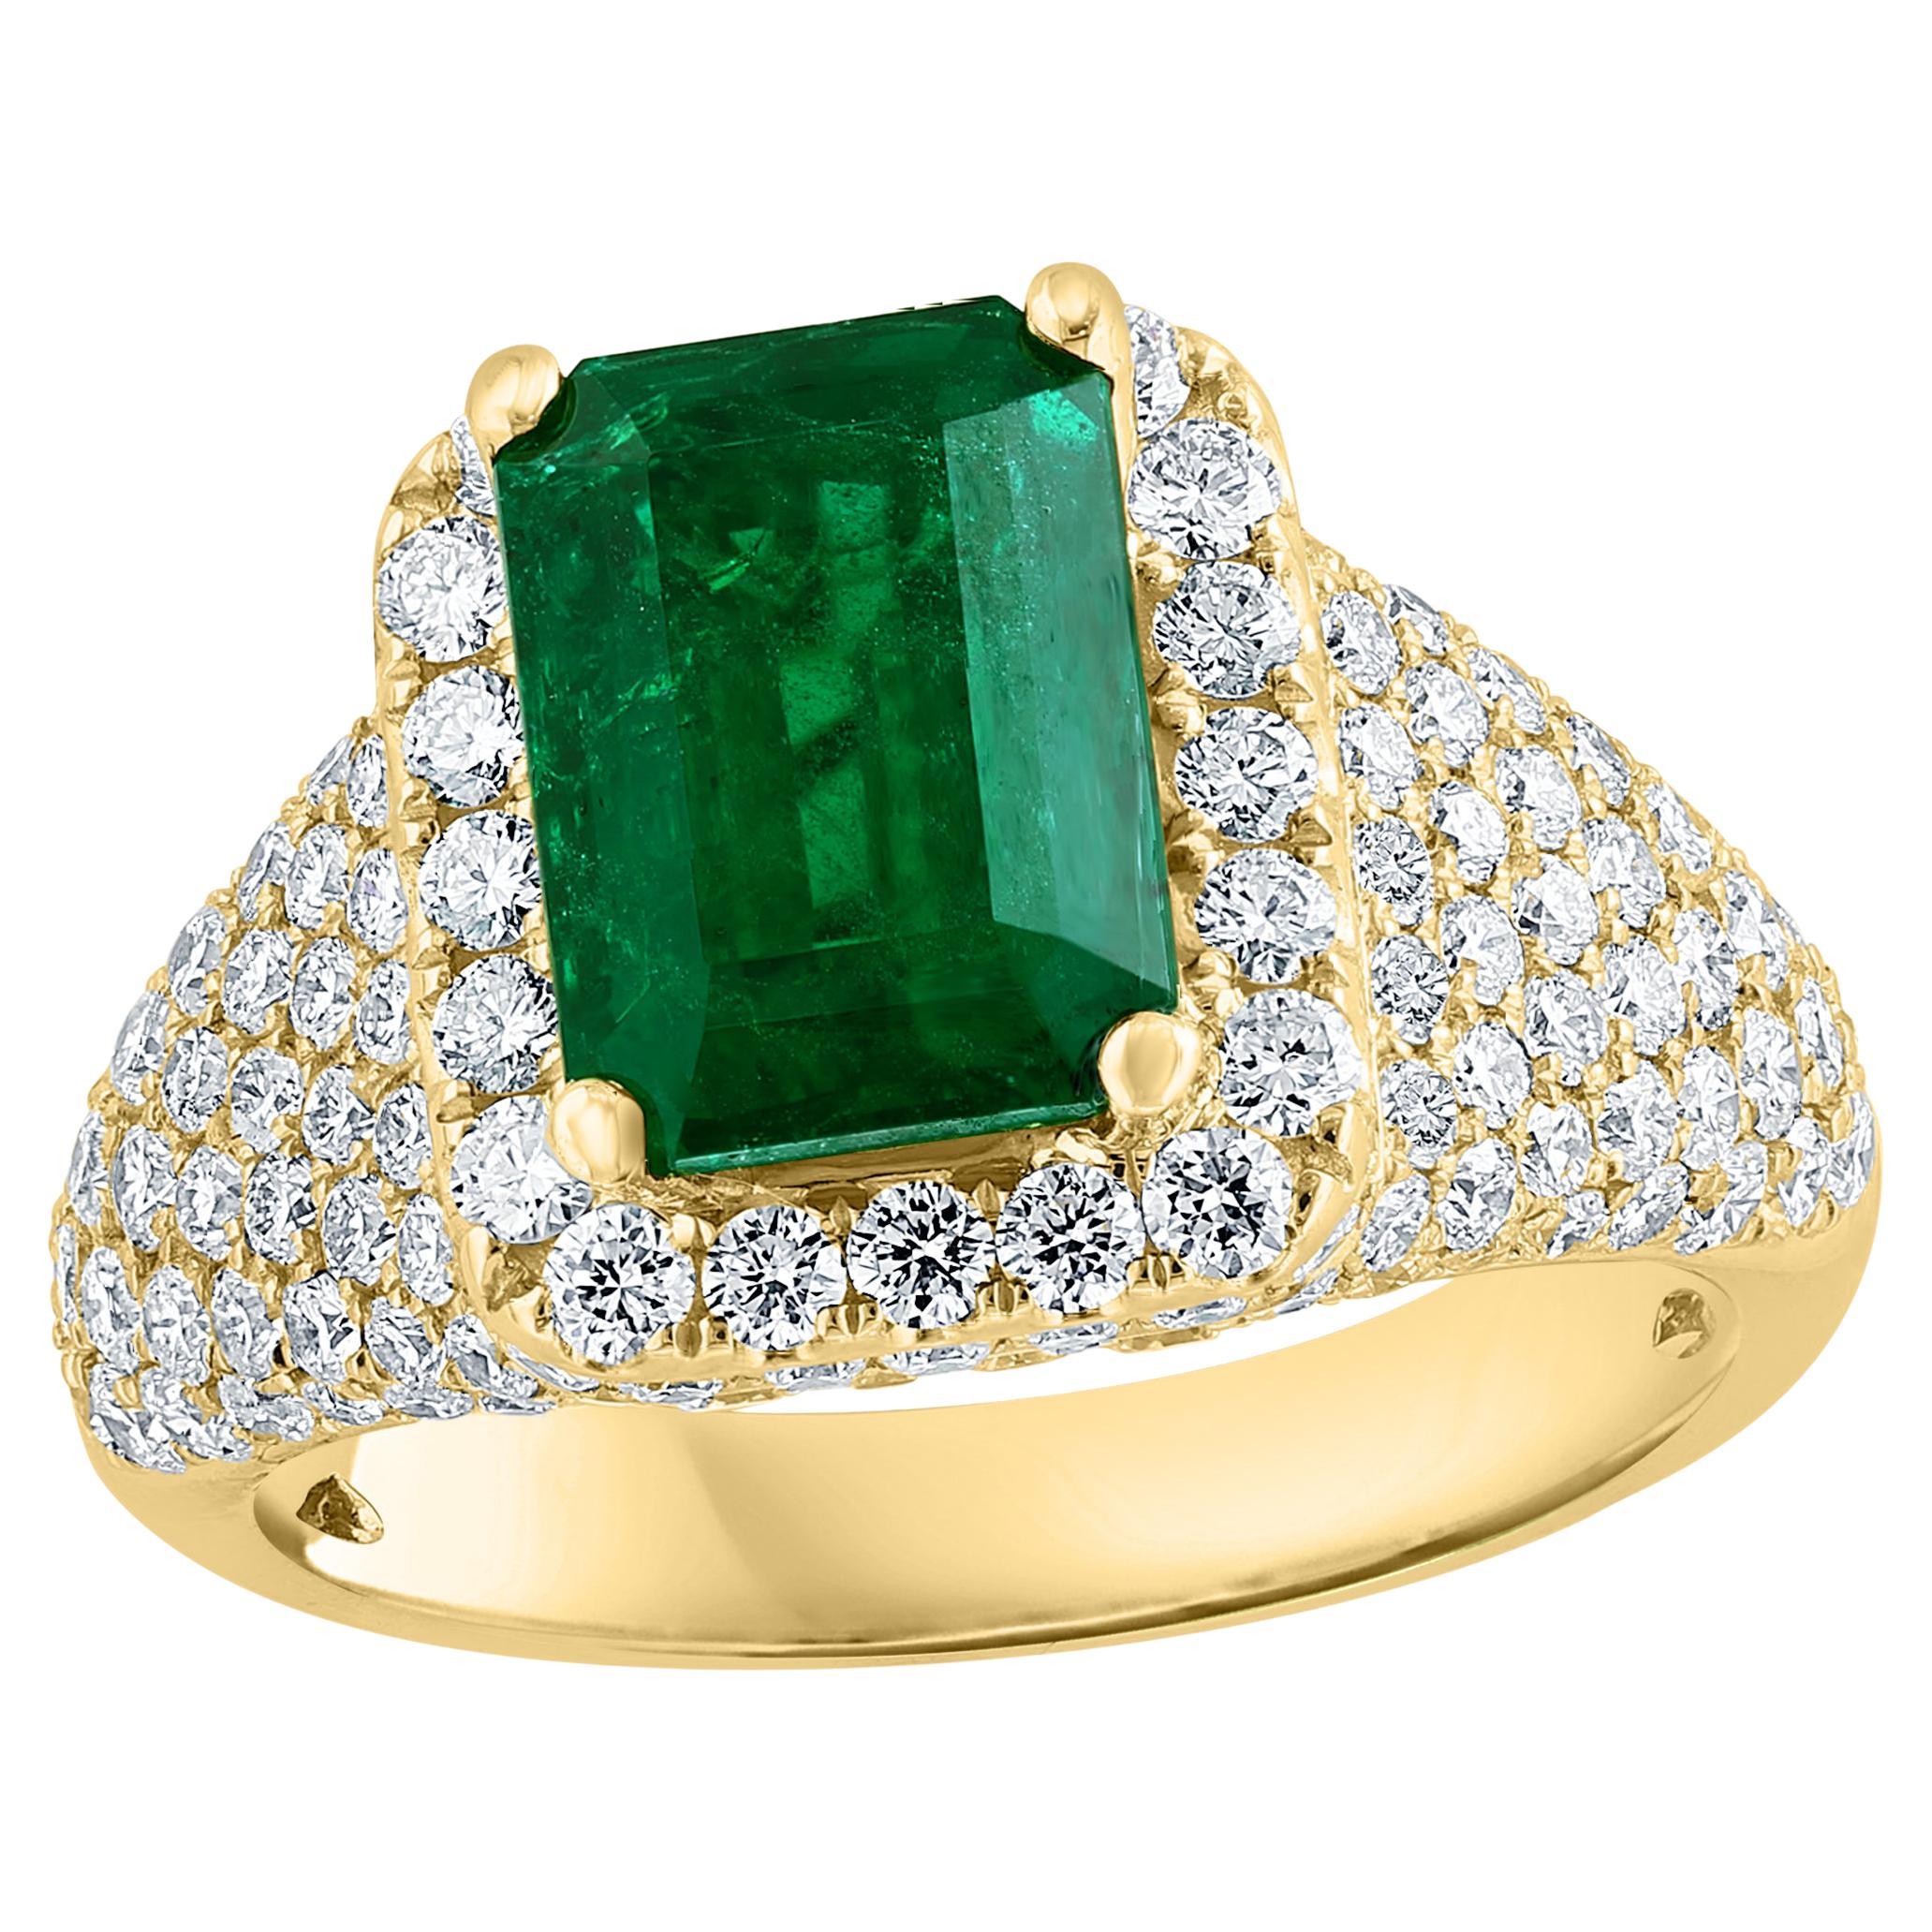 2.08 Carat Emerald Cut Emerald and Diamond Fashion Ring in 18K Yellow Gold For Sale